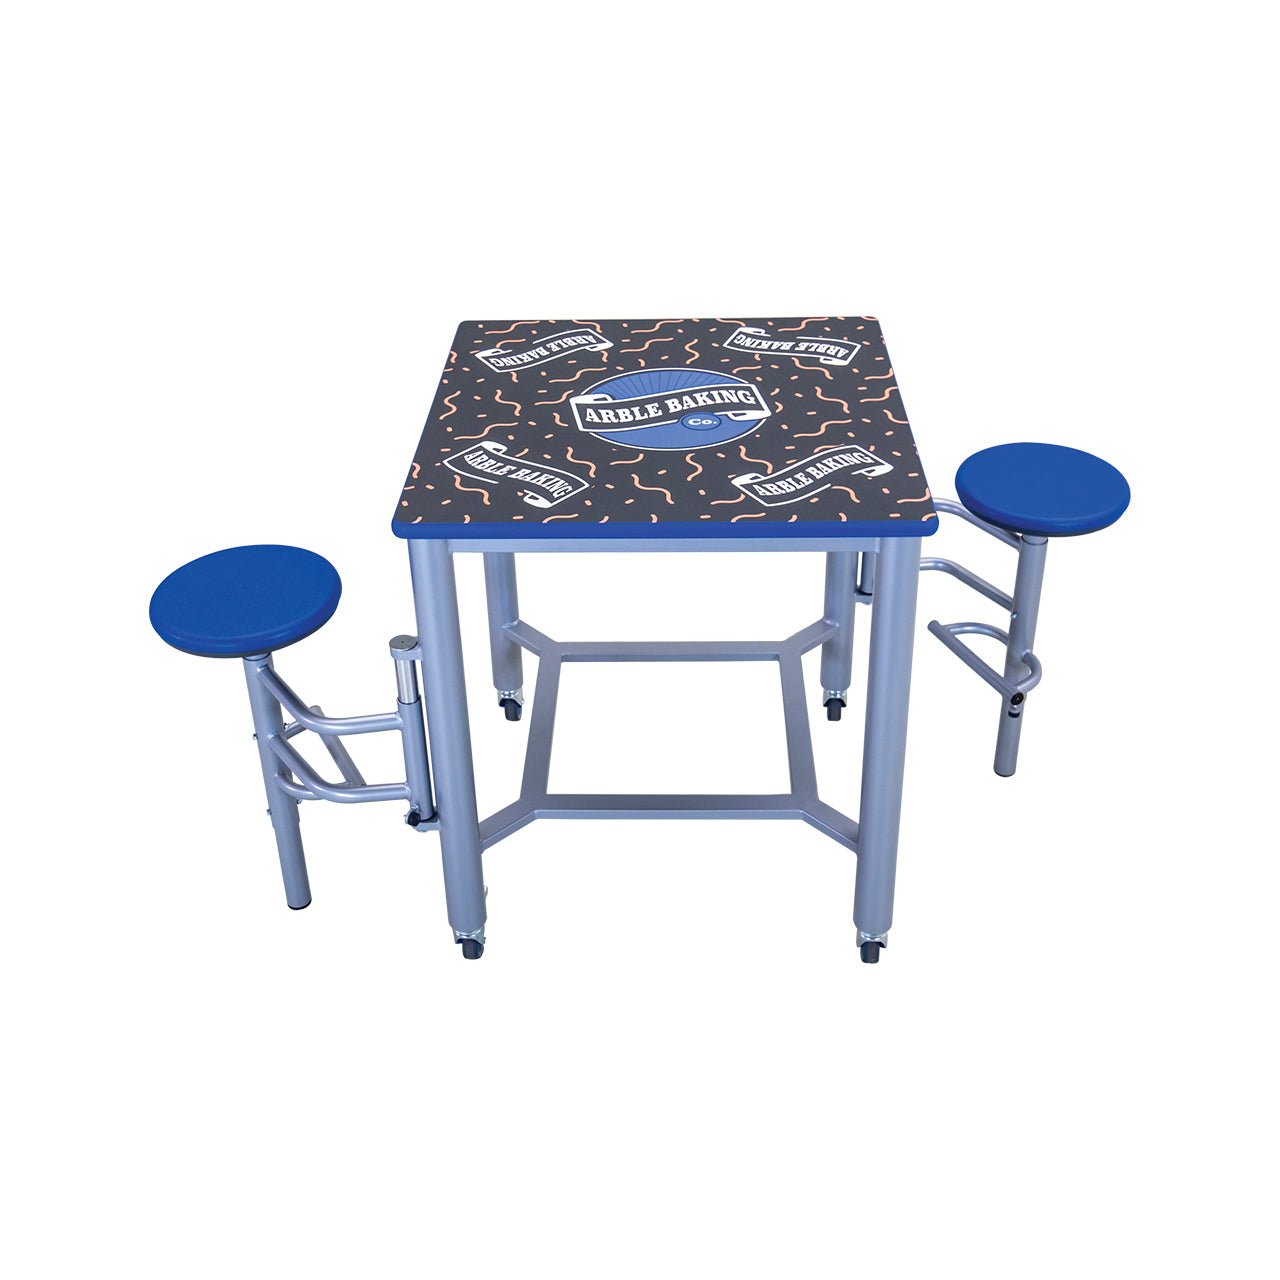 AmTab Mobile Stool Table - Double Collaboration High Table - 36"W x 36"L x 29"H - 2 Stools (AMT-MDST3636-29) - SchoolOutlet